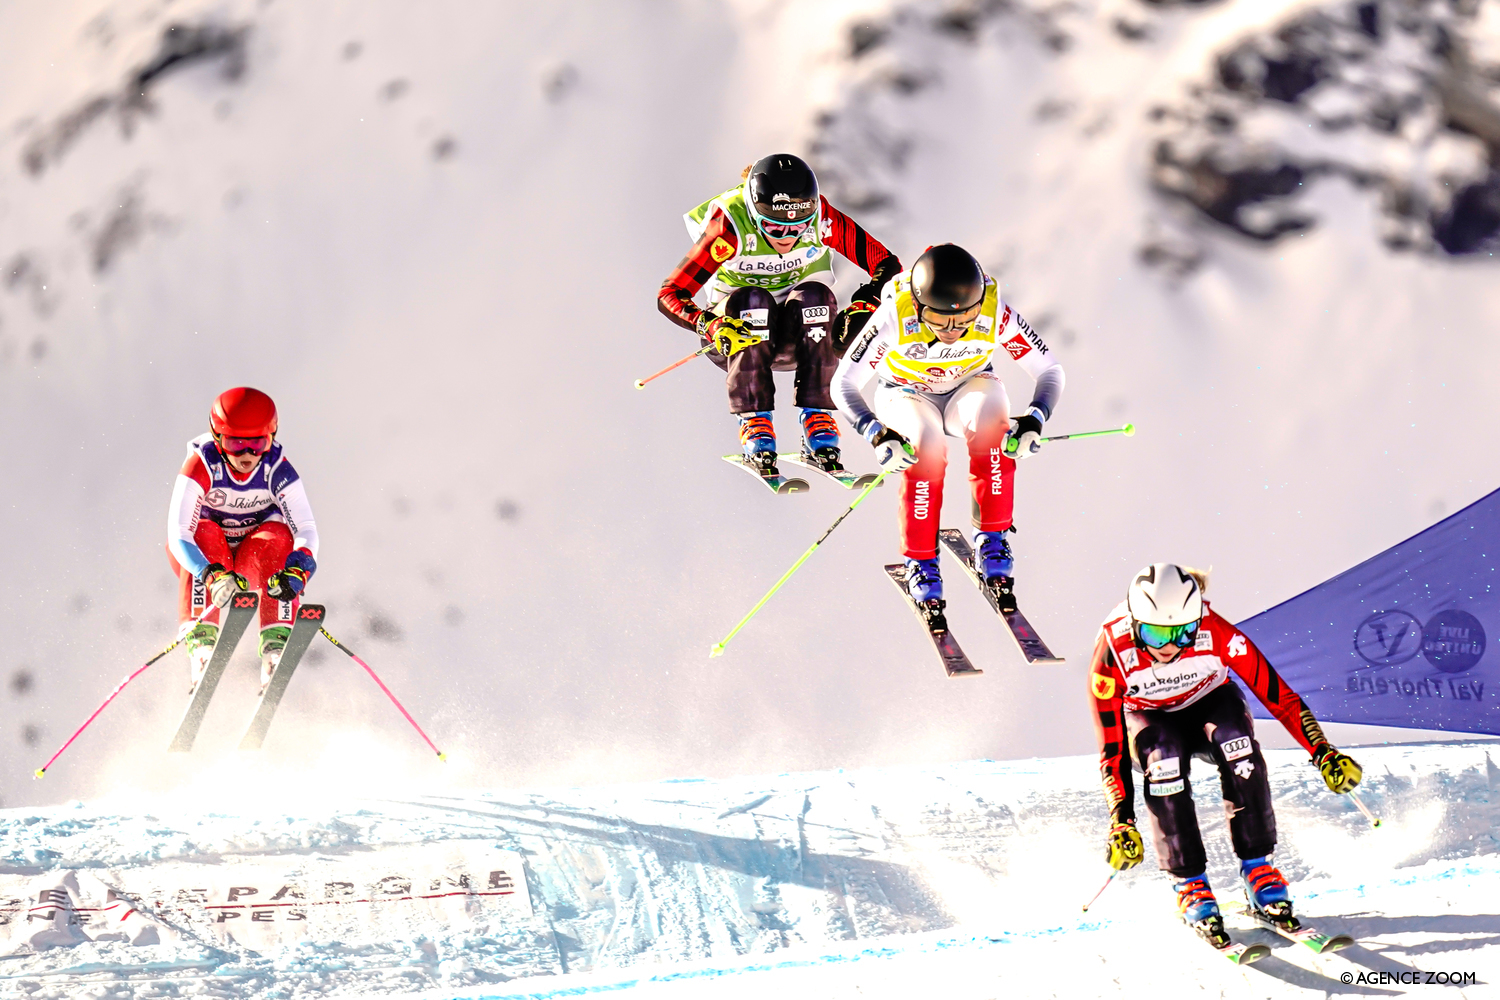 VAL THORENS, FRANCE - DECEMBER 7: Courtney Hoffos of Canada in action, Marielle Berger Sabbatel of France in action, Brittany Phelan of Canada in action, Sixtine Cousin of Switzerland in action during the FIS Freestyle Ski World Cup Men's and Women's Ski Cross on December 7, 2019 in Val Thorens, France. (Photo by Millo Moravski/Agence Zoom)